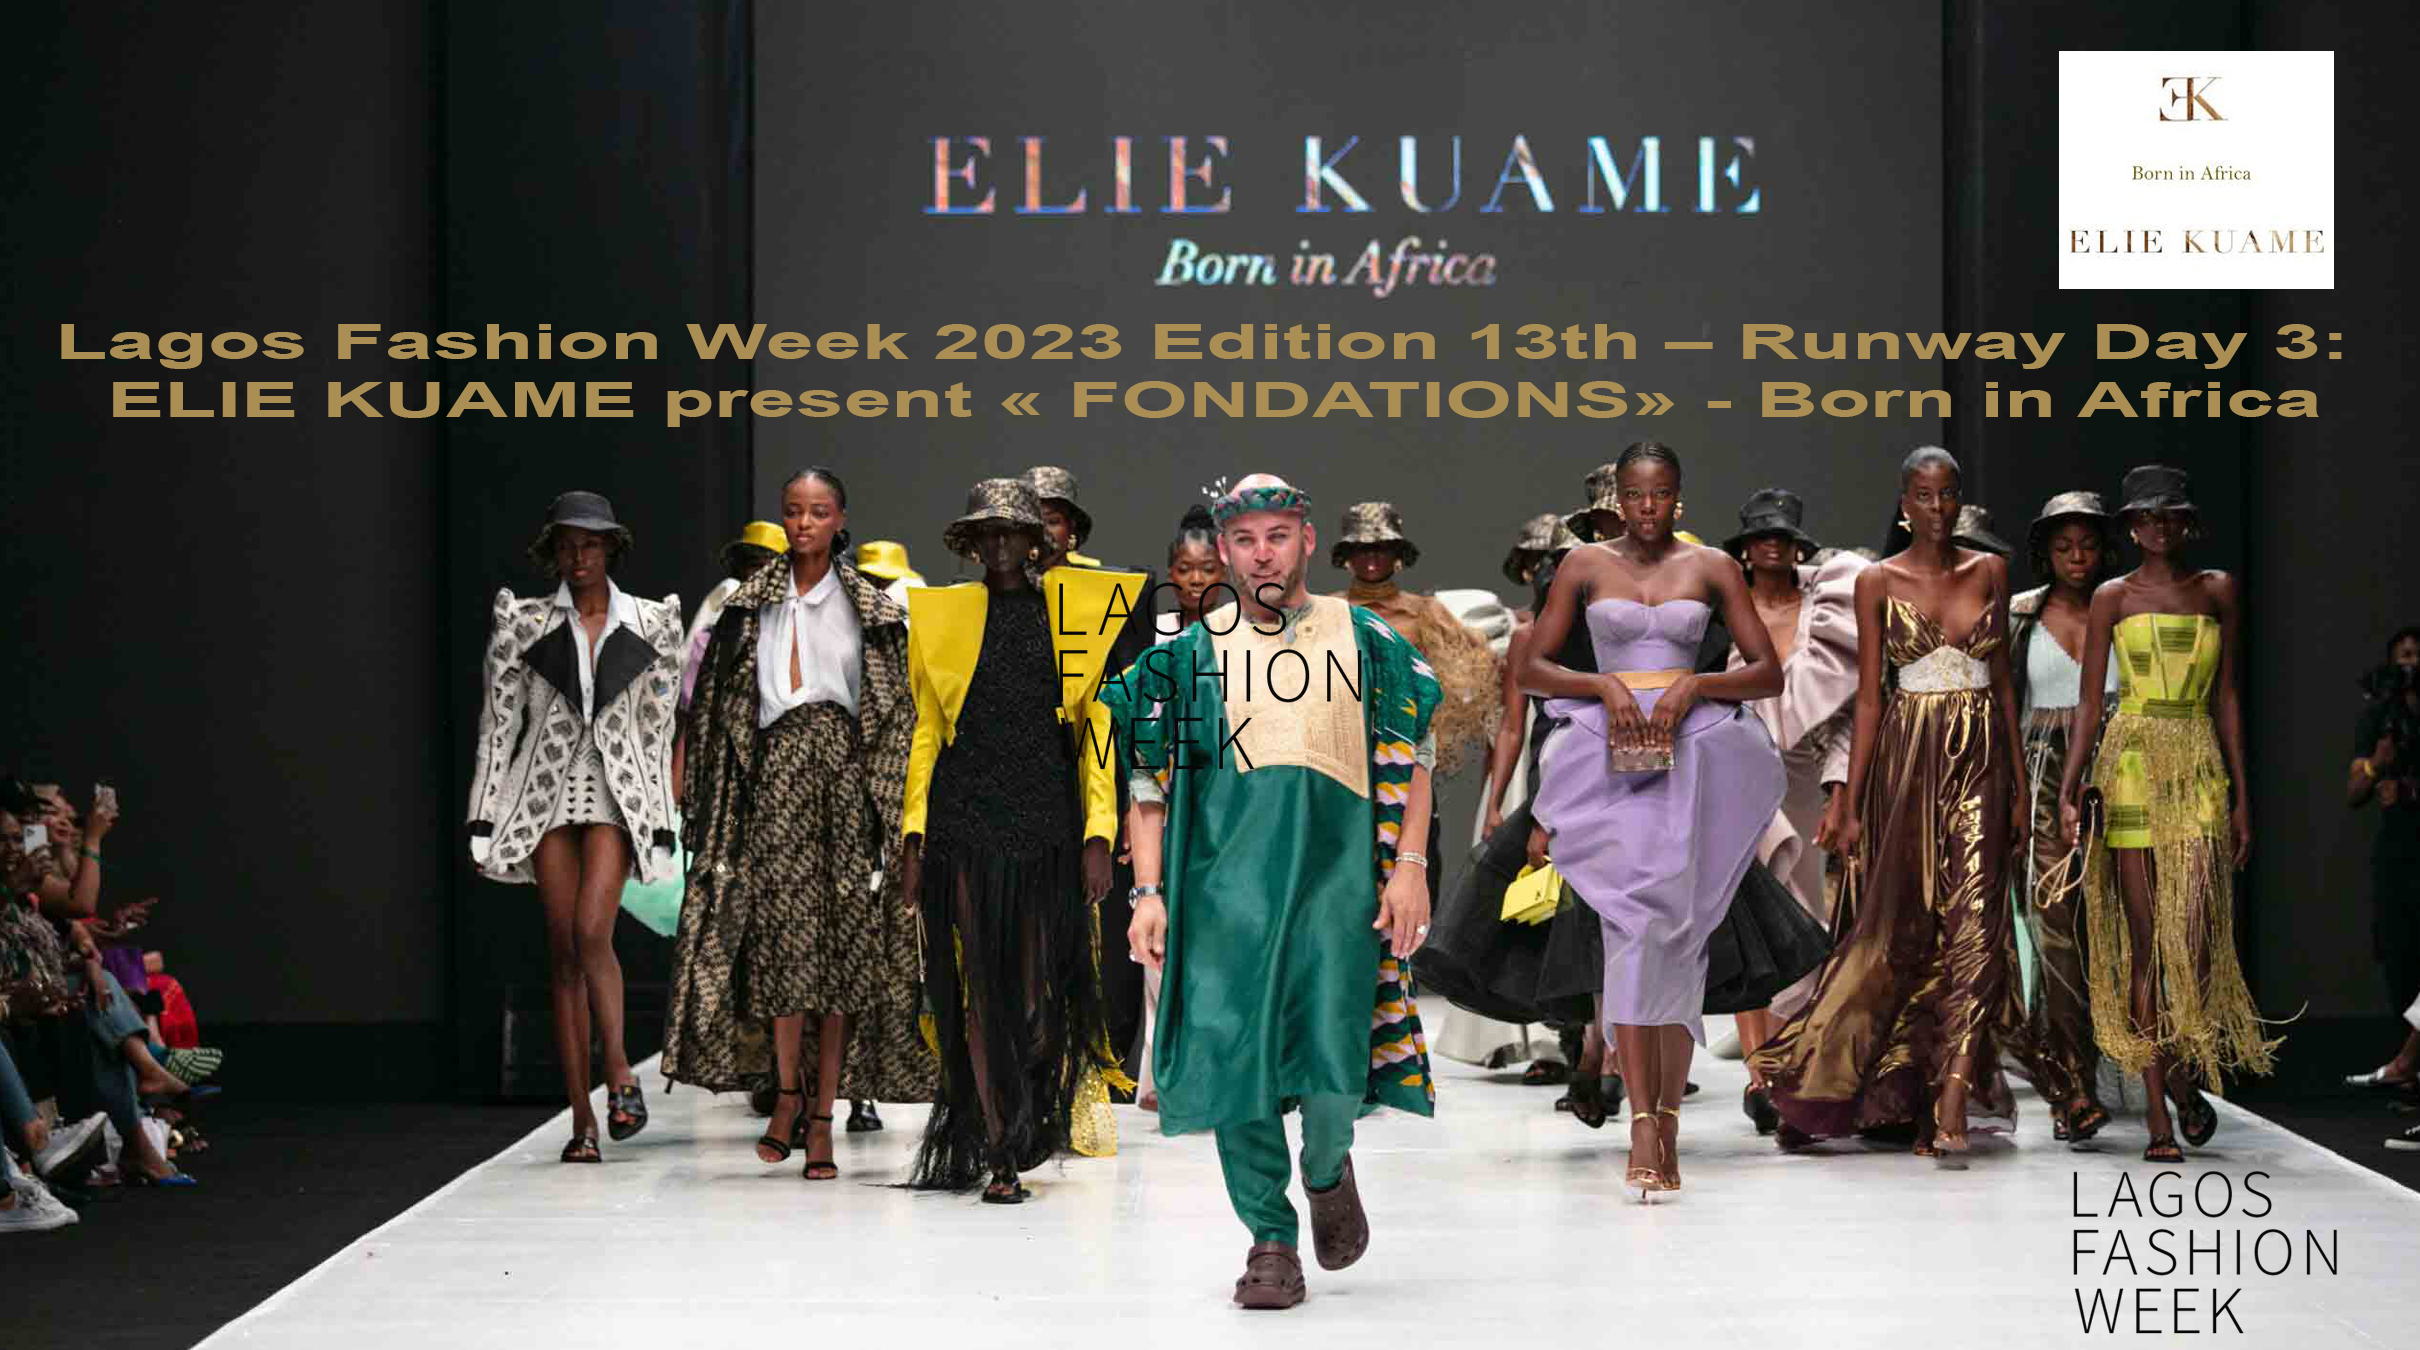 AFRICA-VOGUE-COVER-Lagos-Fashion-Week-2023-Edition-13th-Runway-Day-3-ELIE-KUAME-present-FONDATIONS-Born-in-Africa-DN-AFRICA-Media-Partner